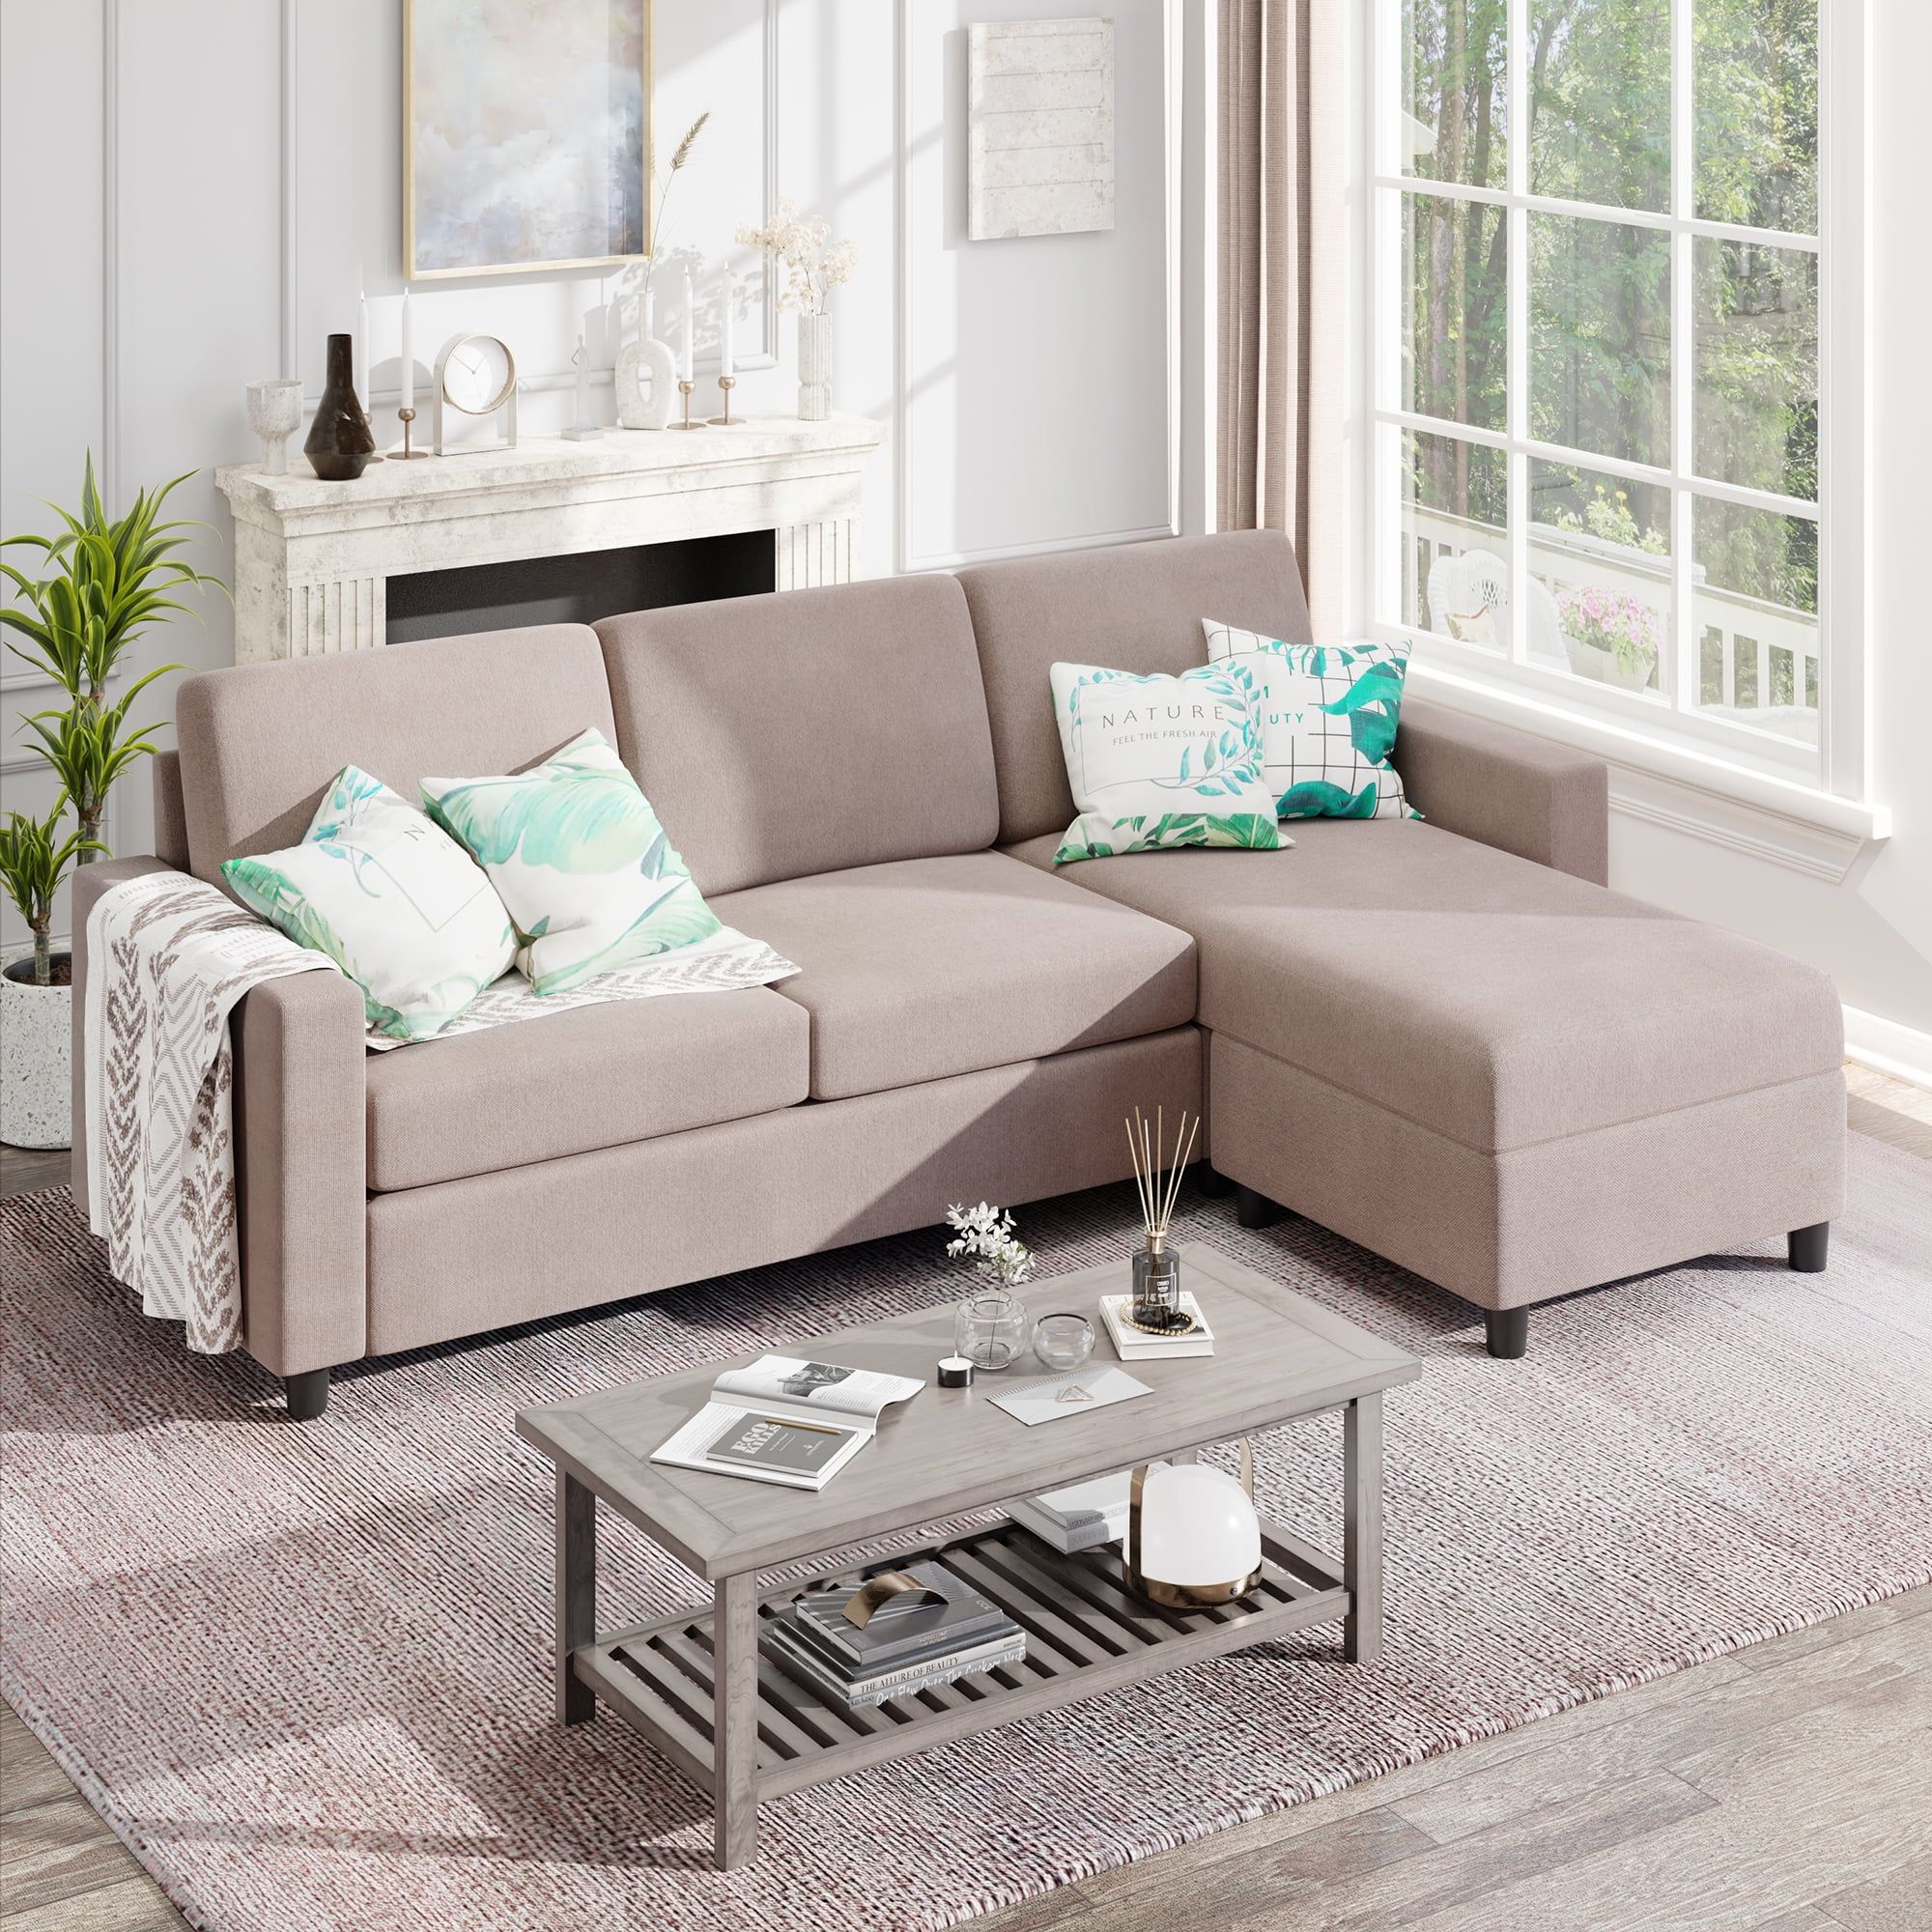 Sobaniilo Convertible Sectional Sofa Couch, Modern Linen Fabric L Shaped 3 Seat  Sofa Sectional With Reversible Chaise For Small Space, Tan – Walmart For 3 Seat Convertible Sectional Sofas (Photo 1 of 15)